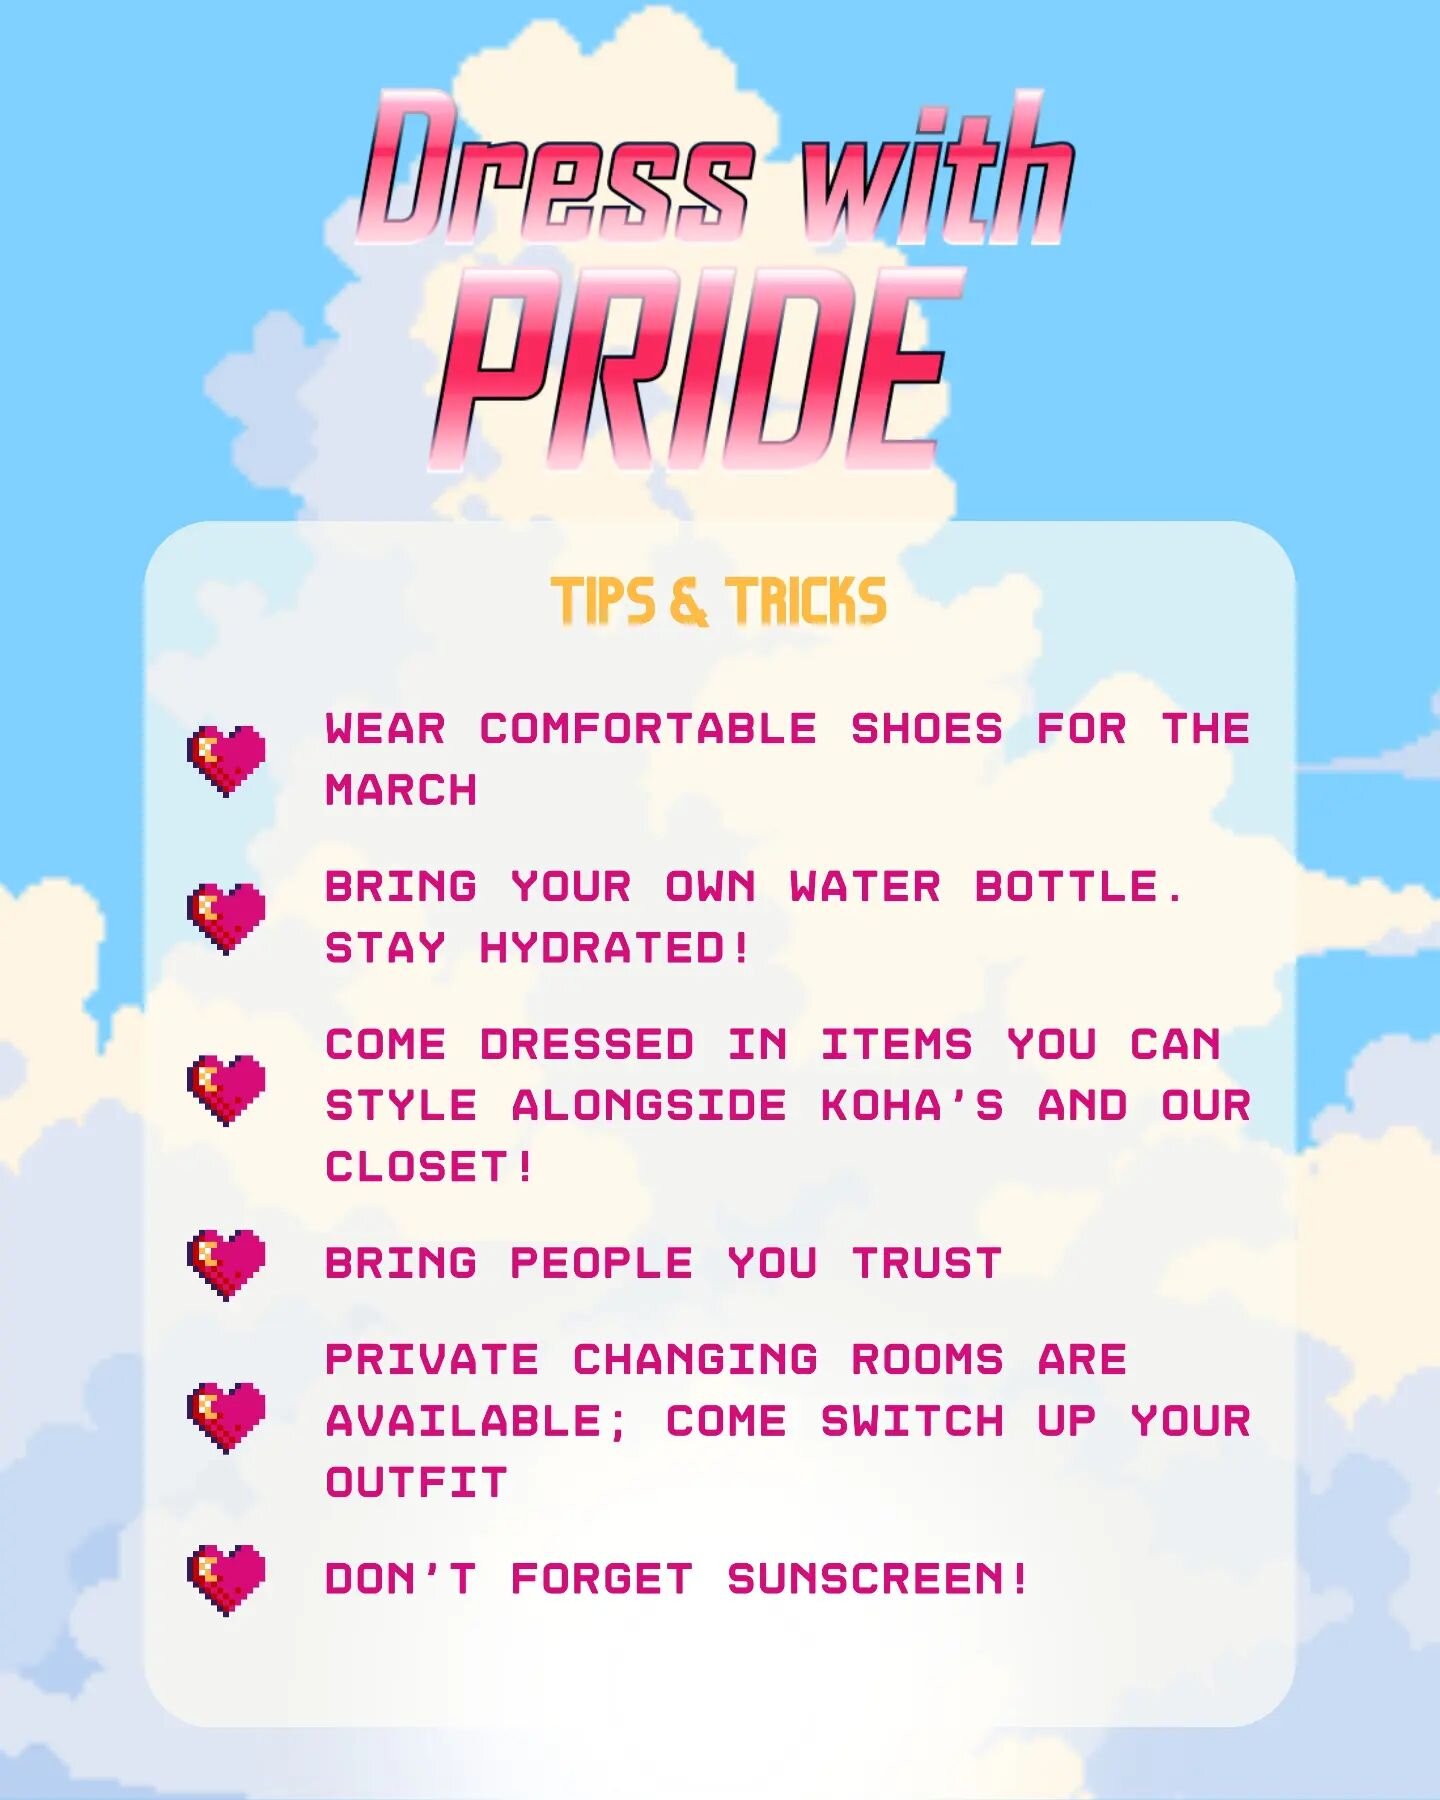 Dress with Pride is happening this Sunday! Here's some handy tips and tricks to keep you and your buddies safe ✨️

Make sure you've registered!! Link in bio!!